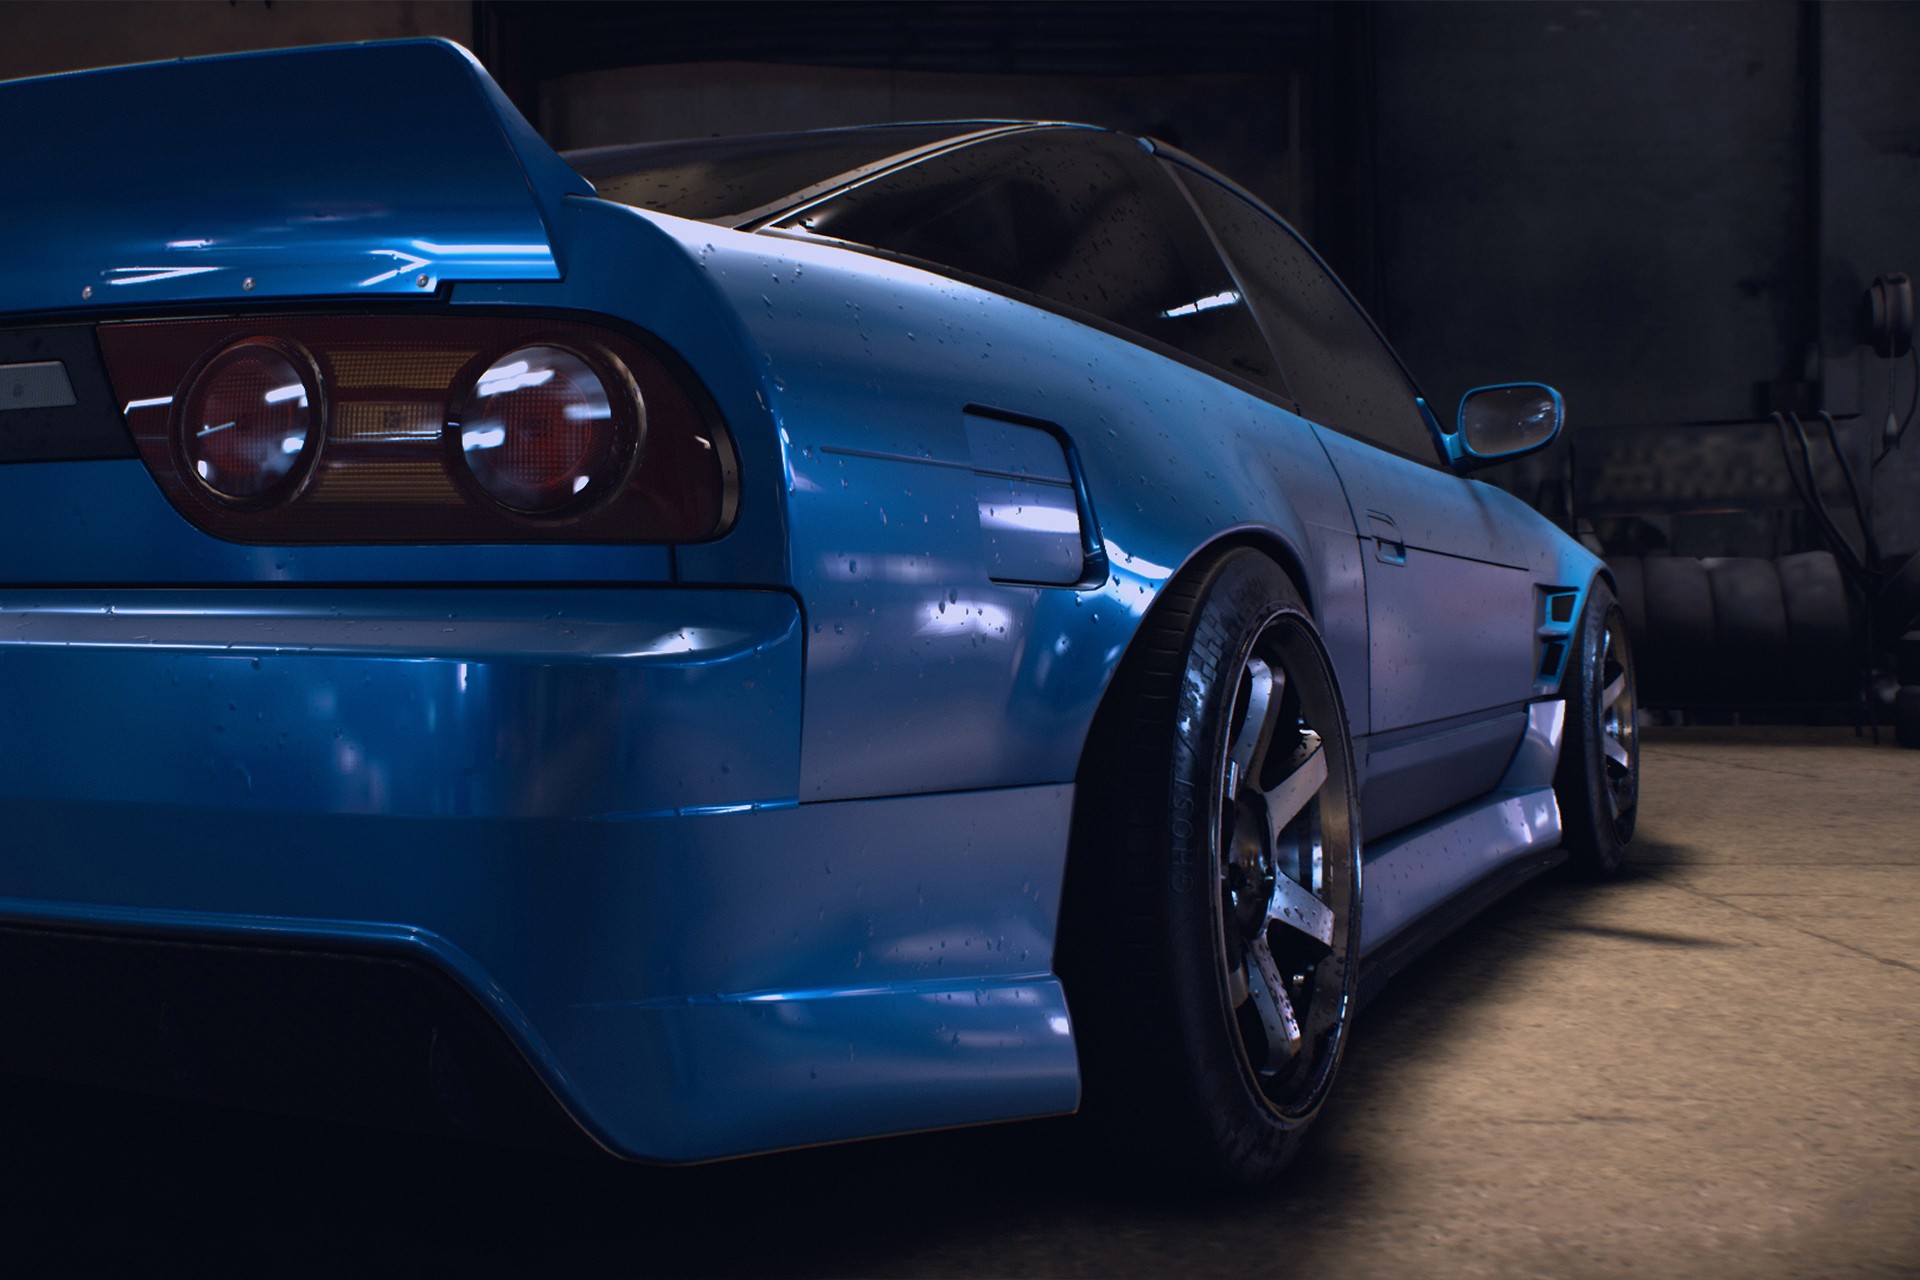 General 1920x1280 Need for Speed video games racing car Nissan Nissan 180SX Liberty Walk Rocket Bunny blue cars vehicle 2015 (Year)